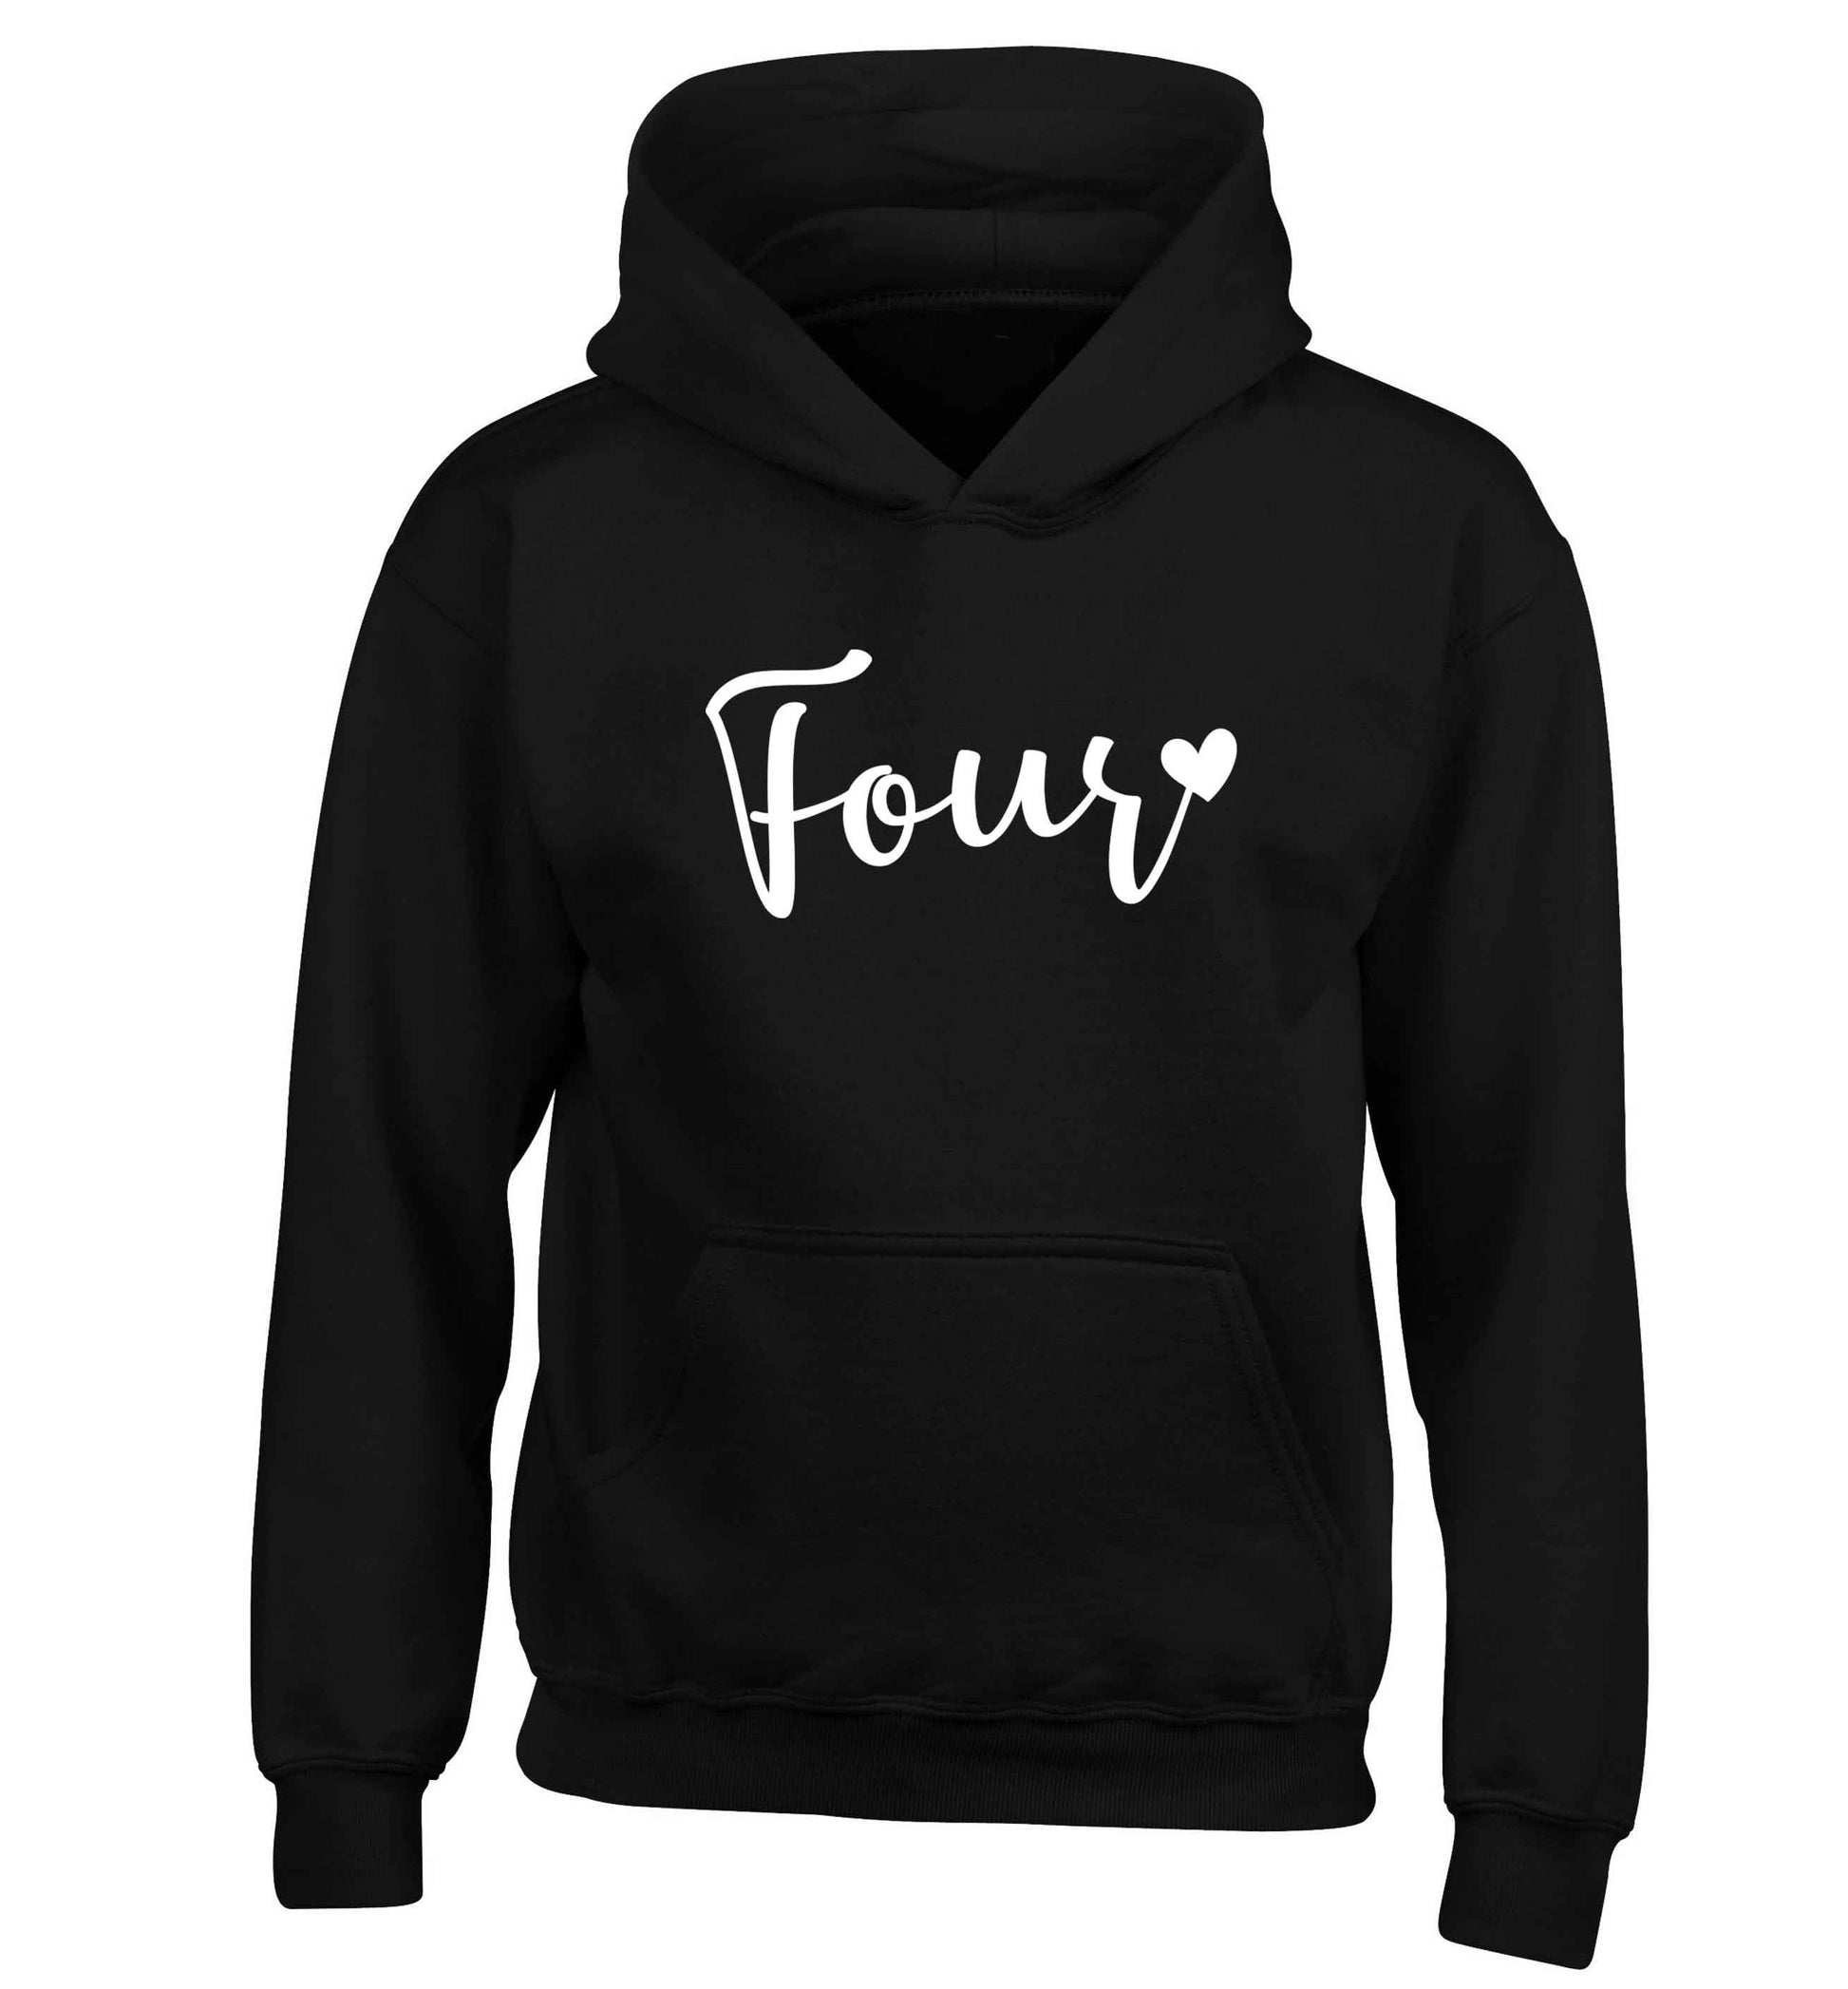 Four and heart children's black hoodie 12-13 Years